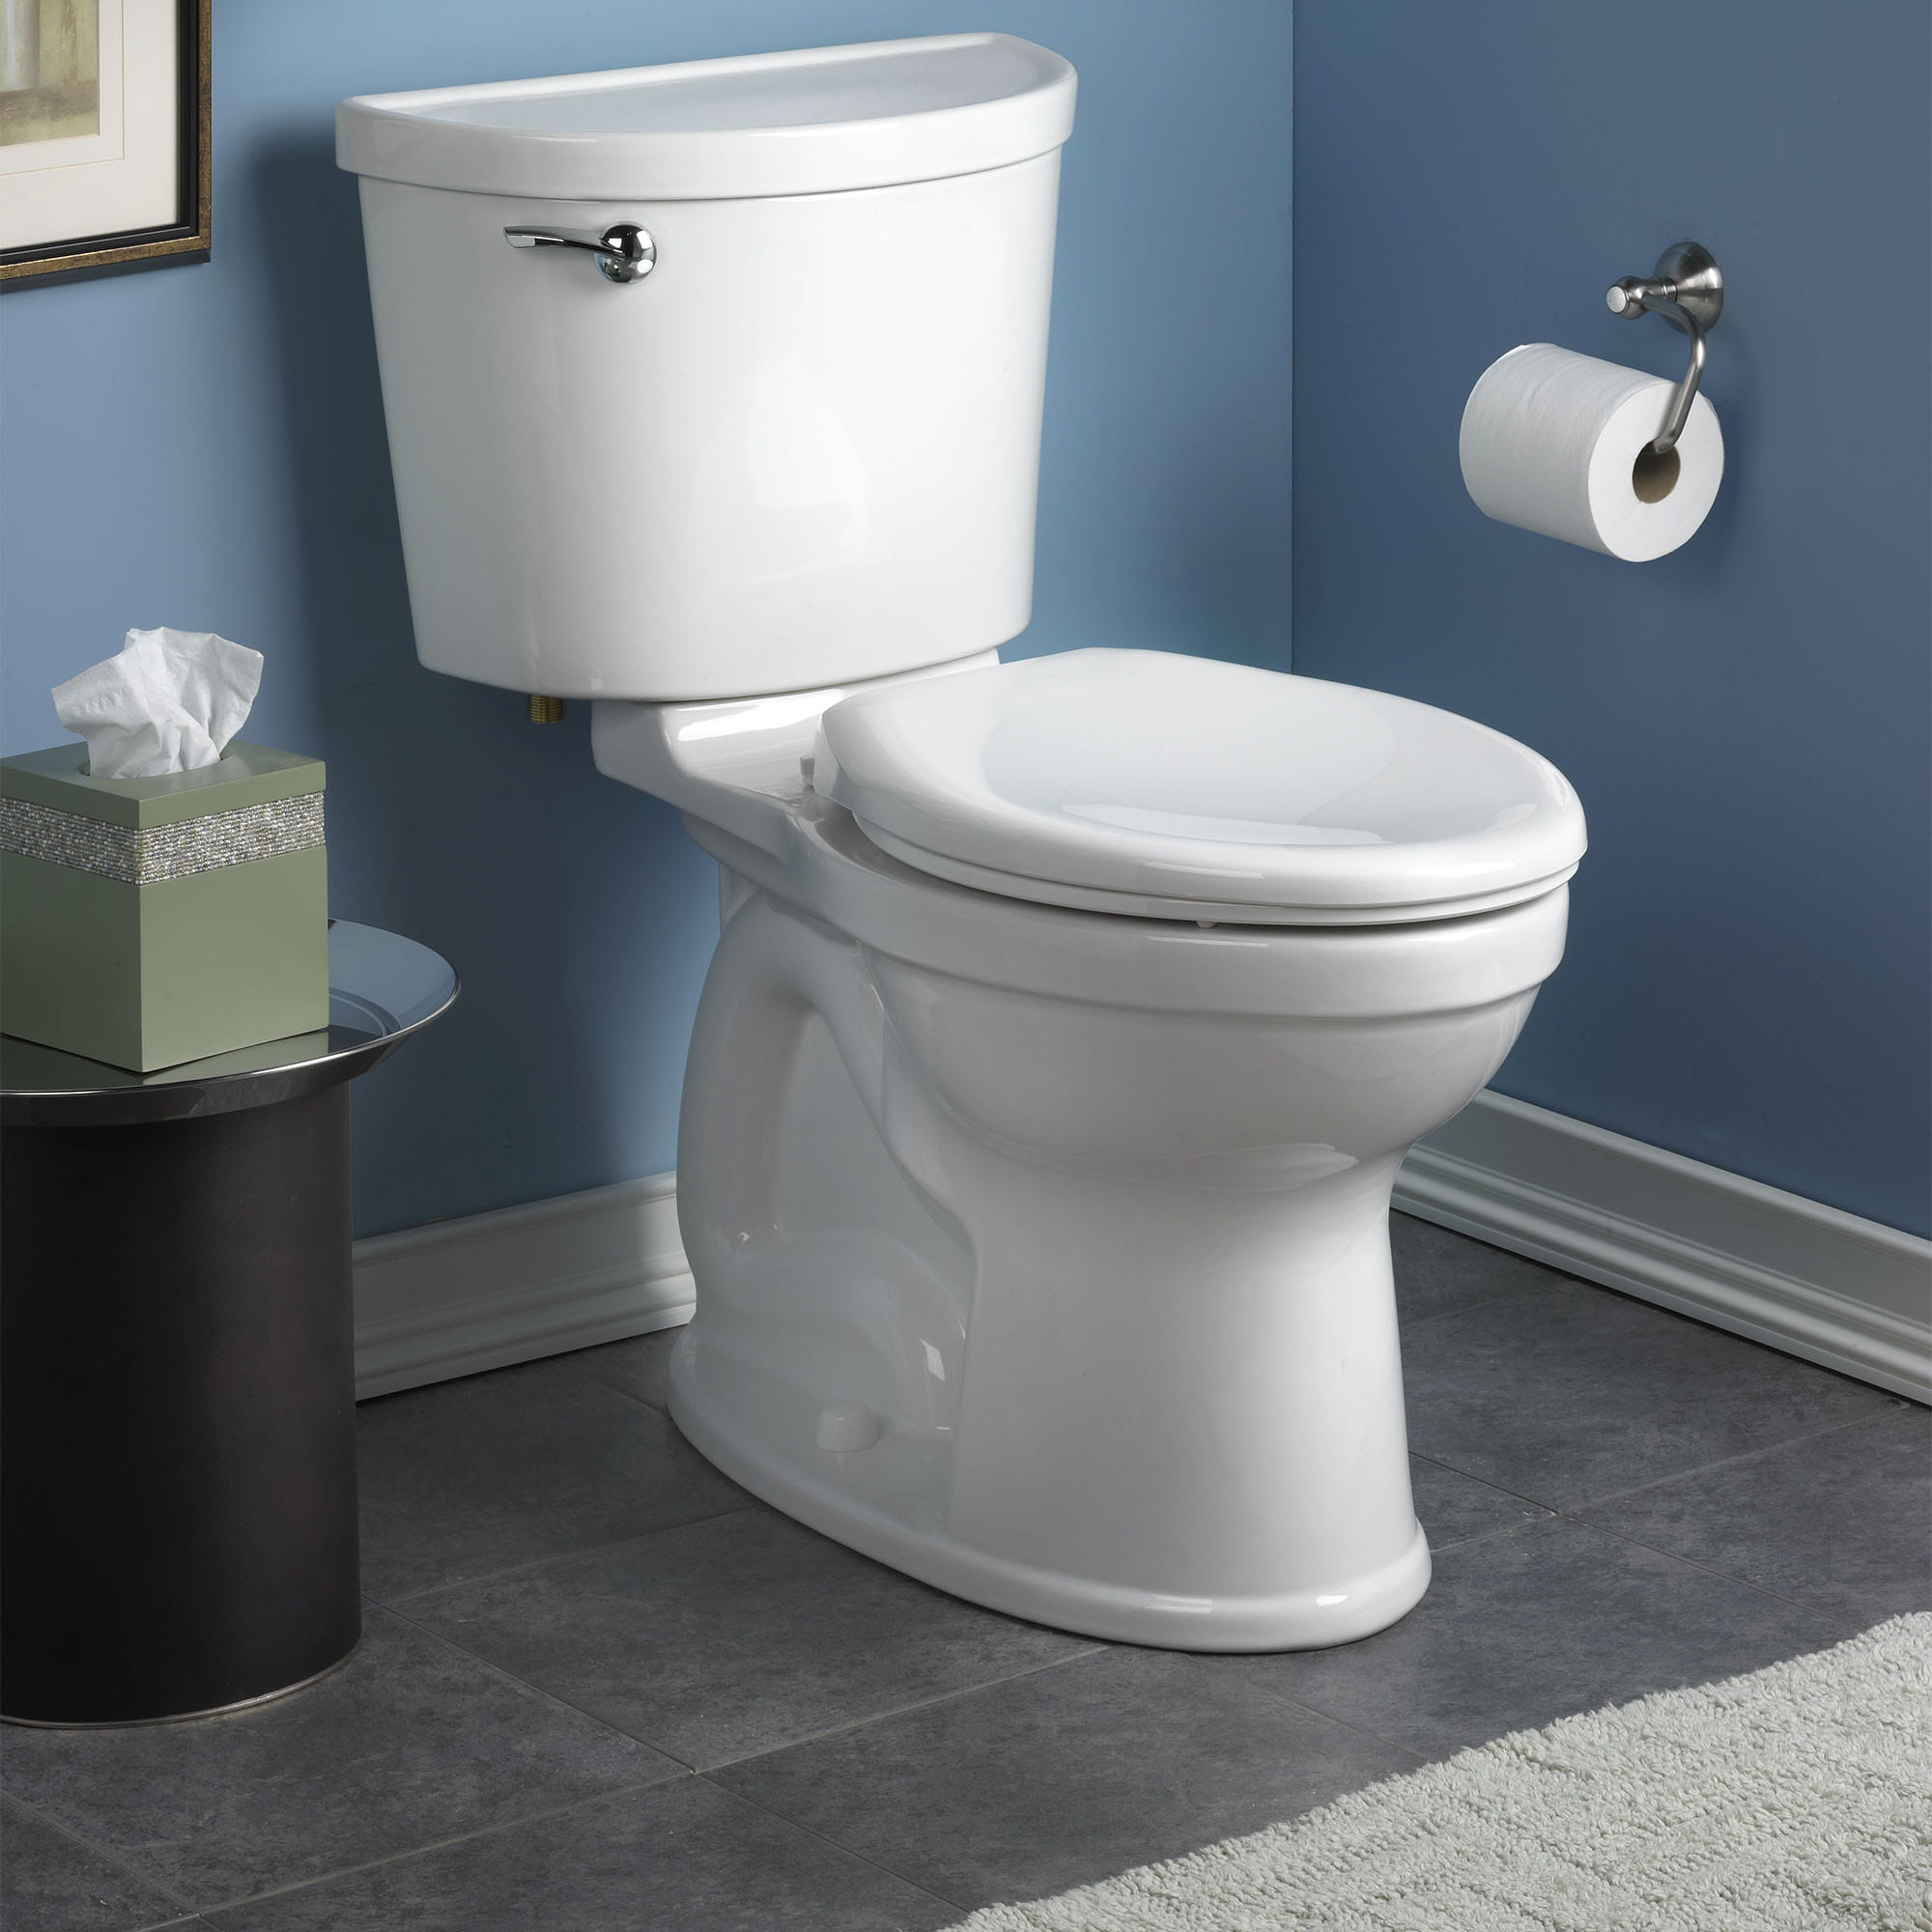 Champion PRO Two Piece 128 gpf 48 Lpf Chair Height Elongated Toilet Less Seat WHITE